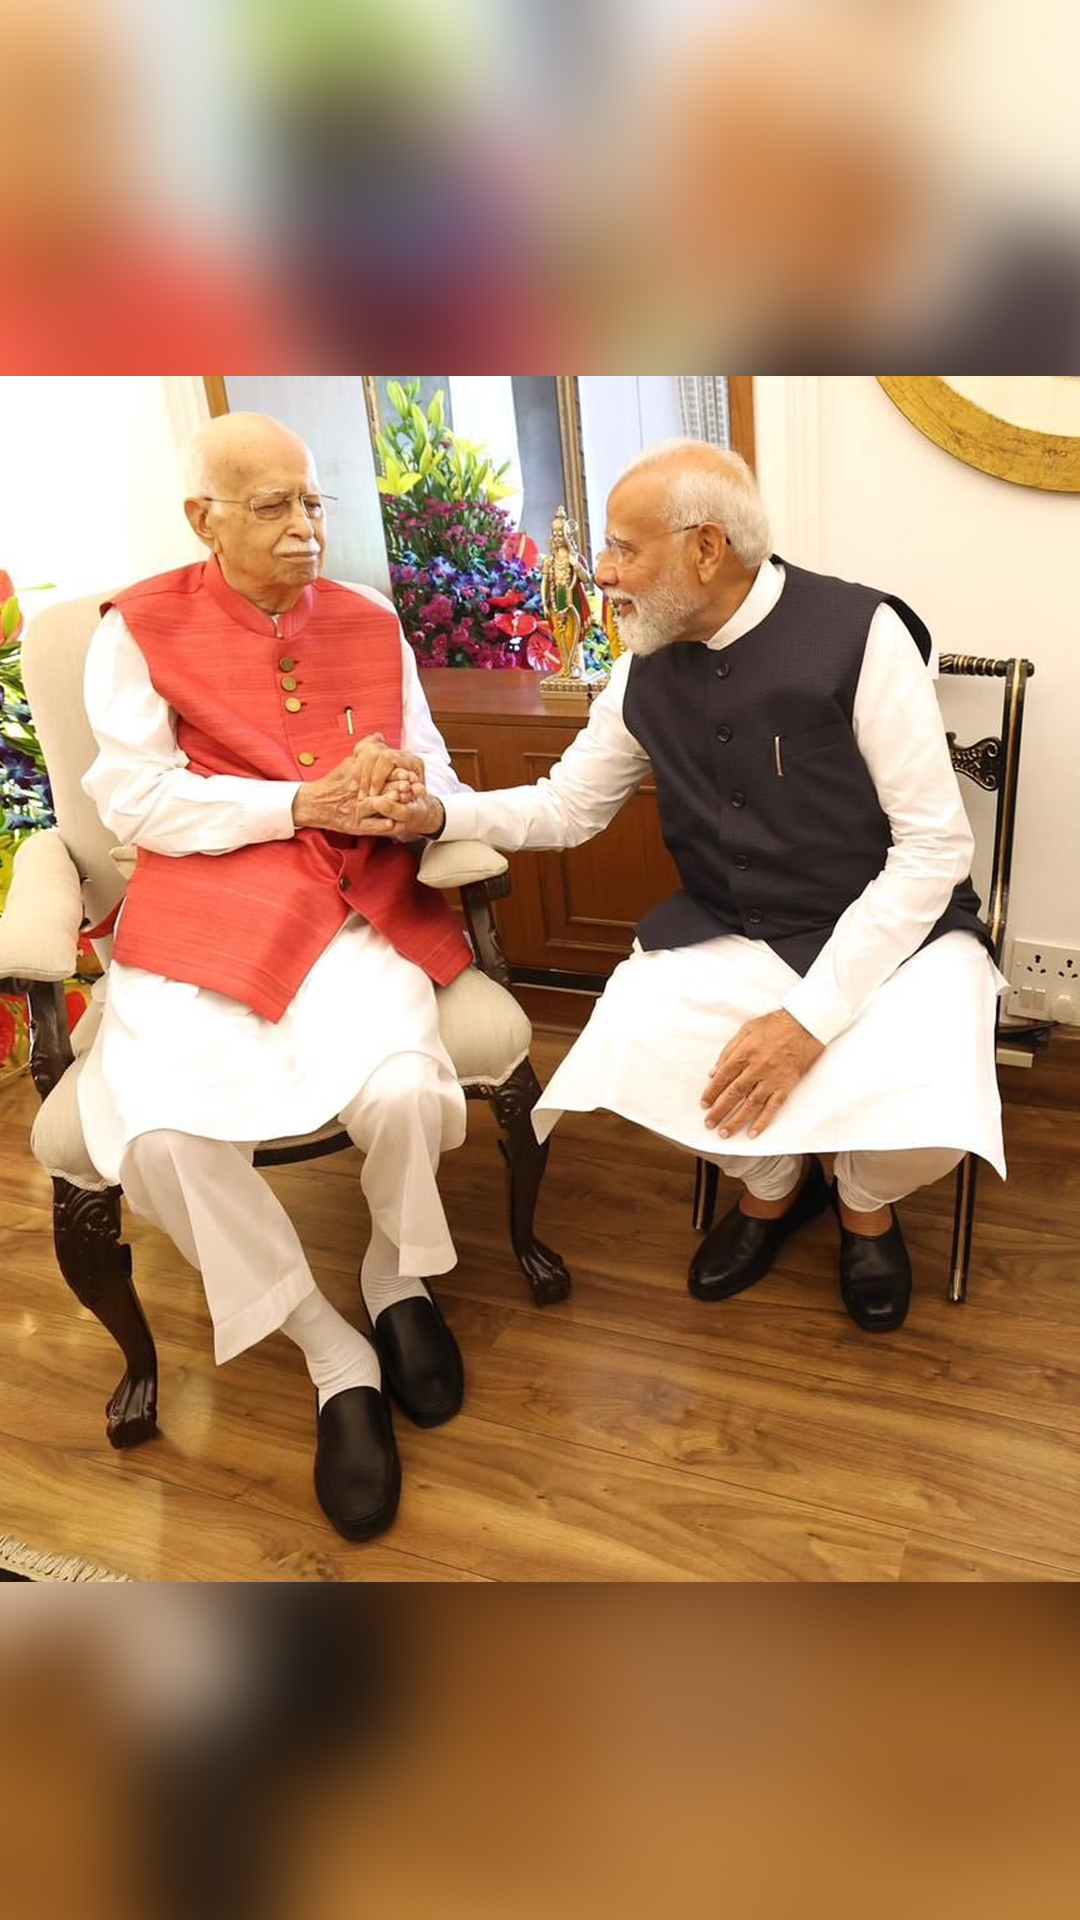 PM Modi shares pictures of LK Advani as Bharat Ratna is conferred on him